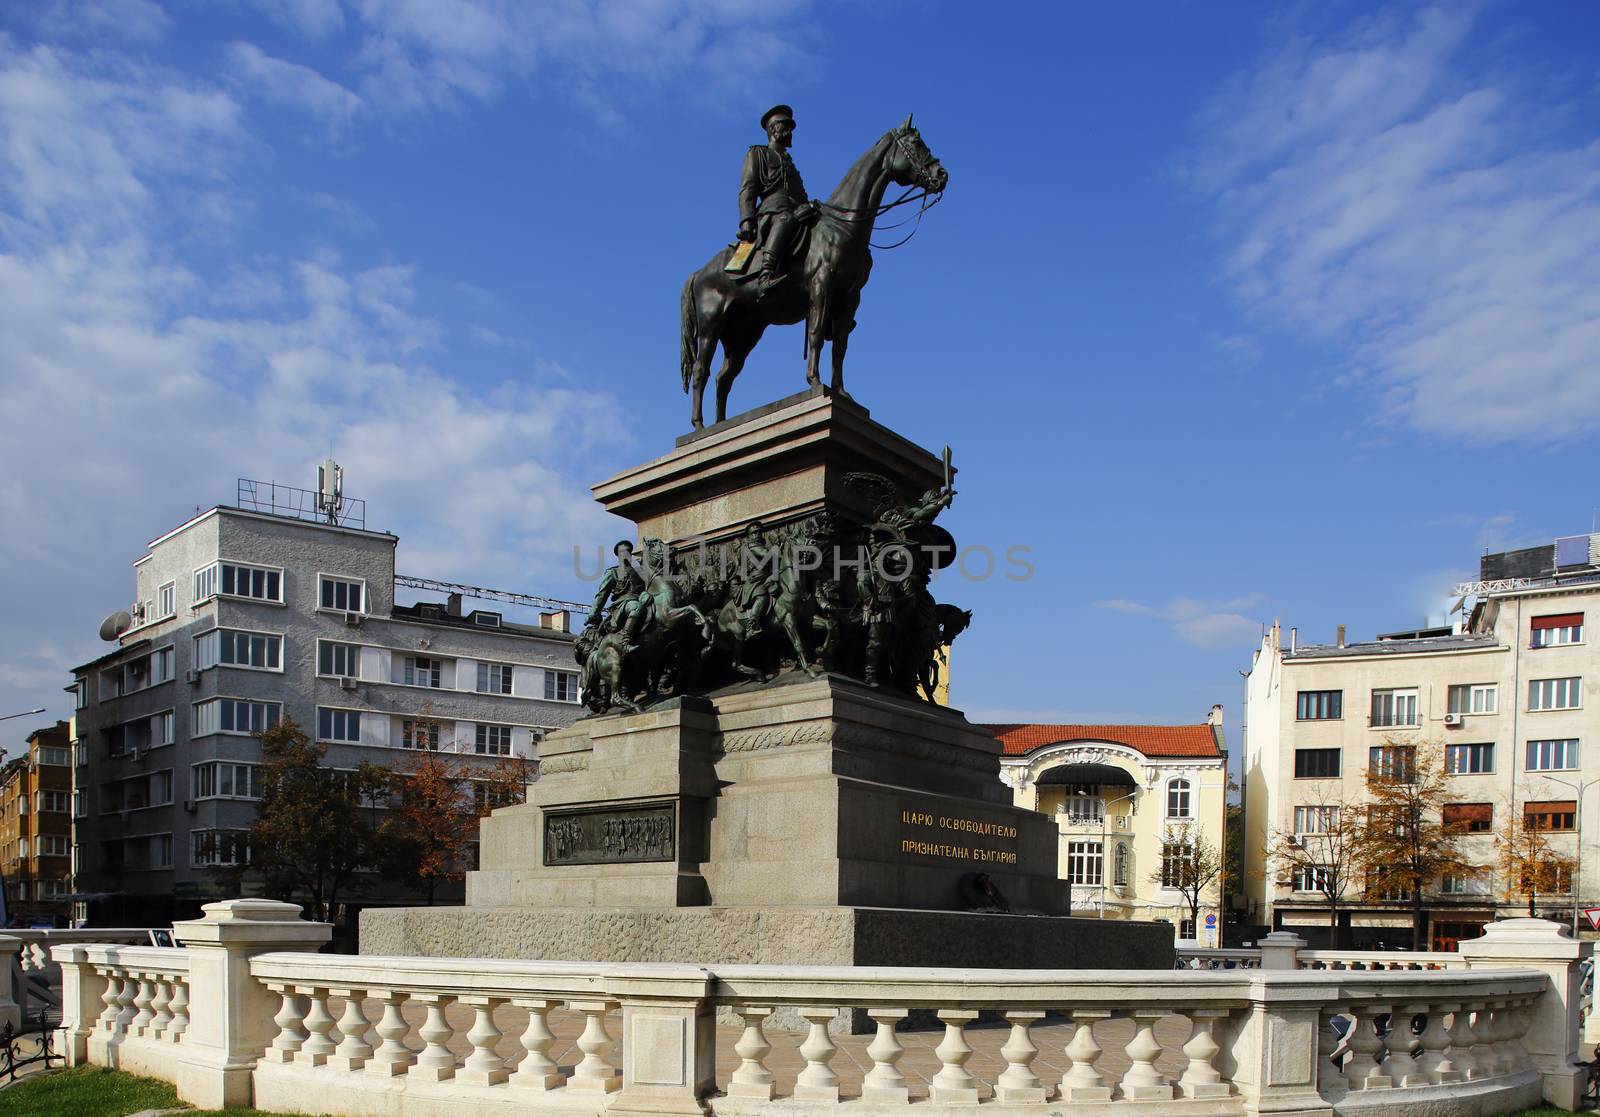 The Monument to the Tsar Liberator  is an equestrian monument in the centre of Sofia, the capital of Bulgaria